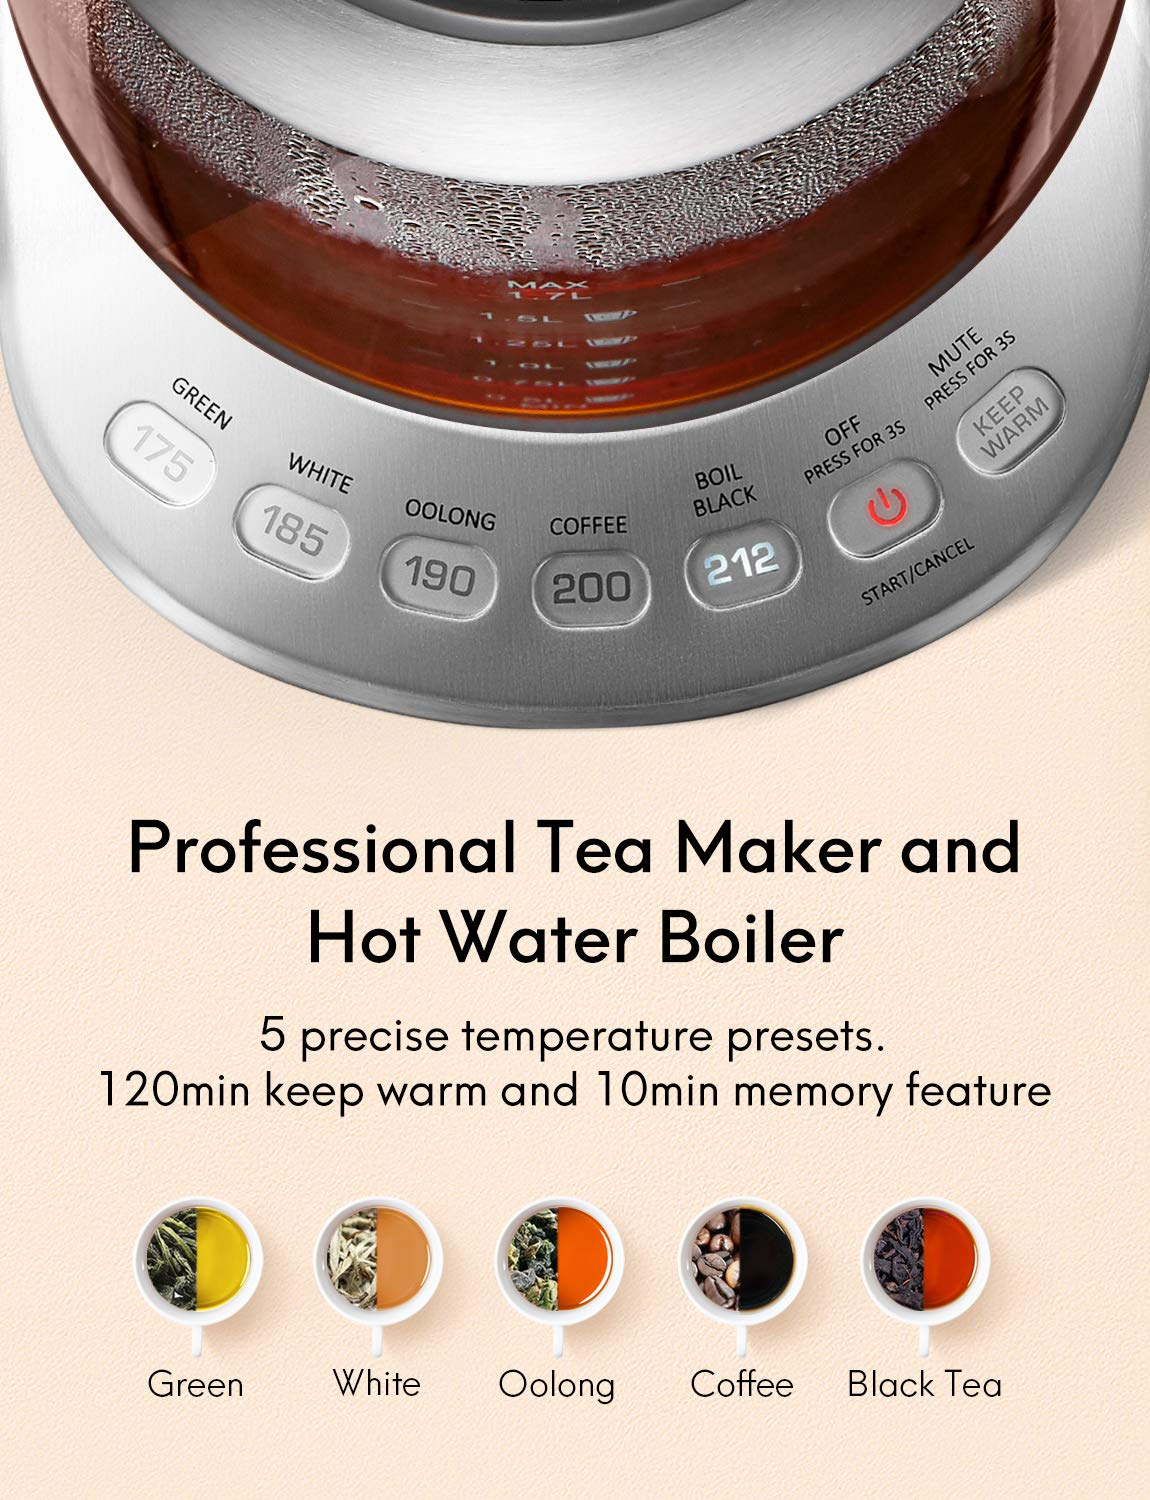 1.7L Stainless Steel Electric Tea Kettle, BPA-Free Hot Water Boiler, Auto  Shut-Off and Boil-Dry Protection, 2200w Fast Boil